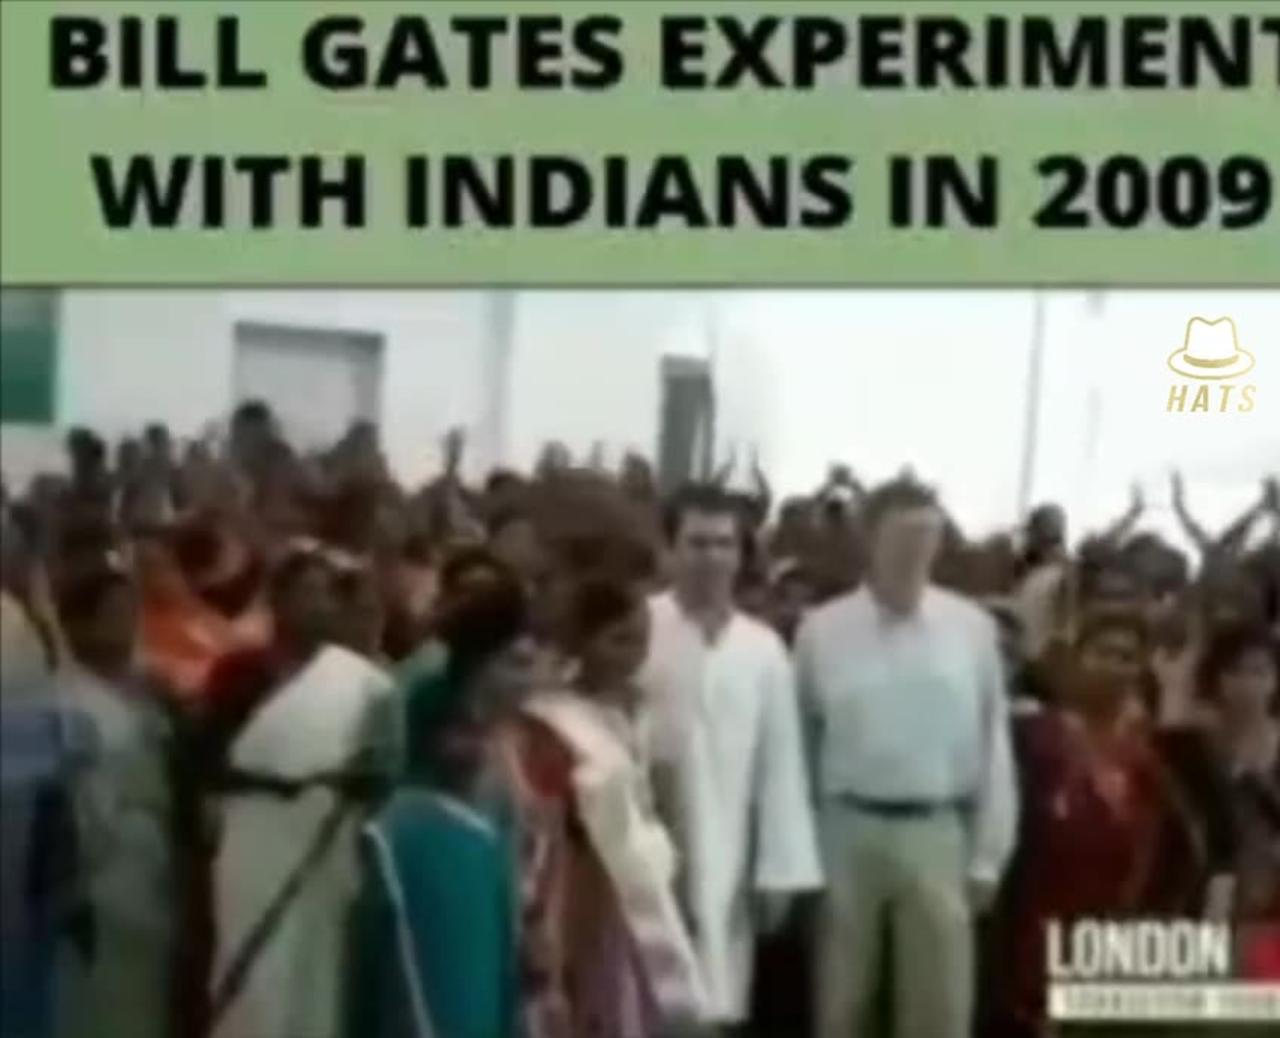 2009 Bill Gates experimenting in India